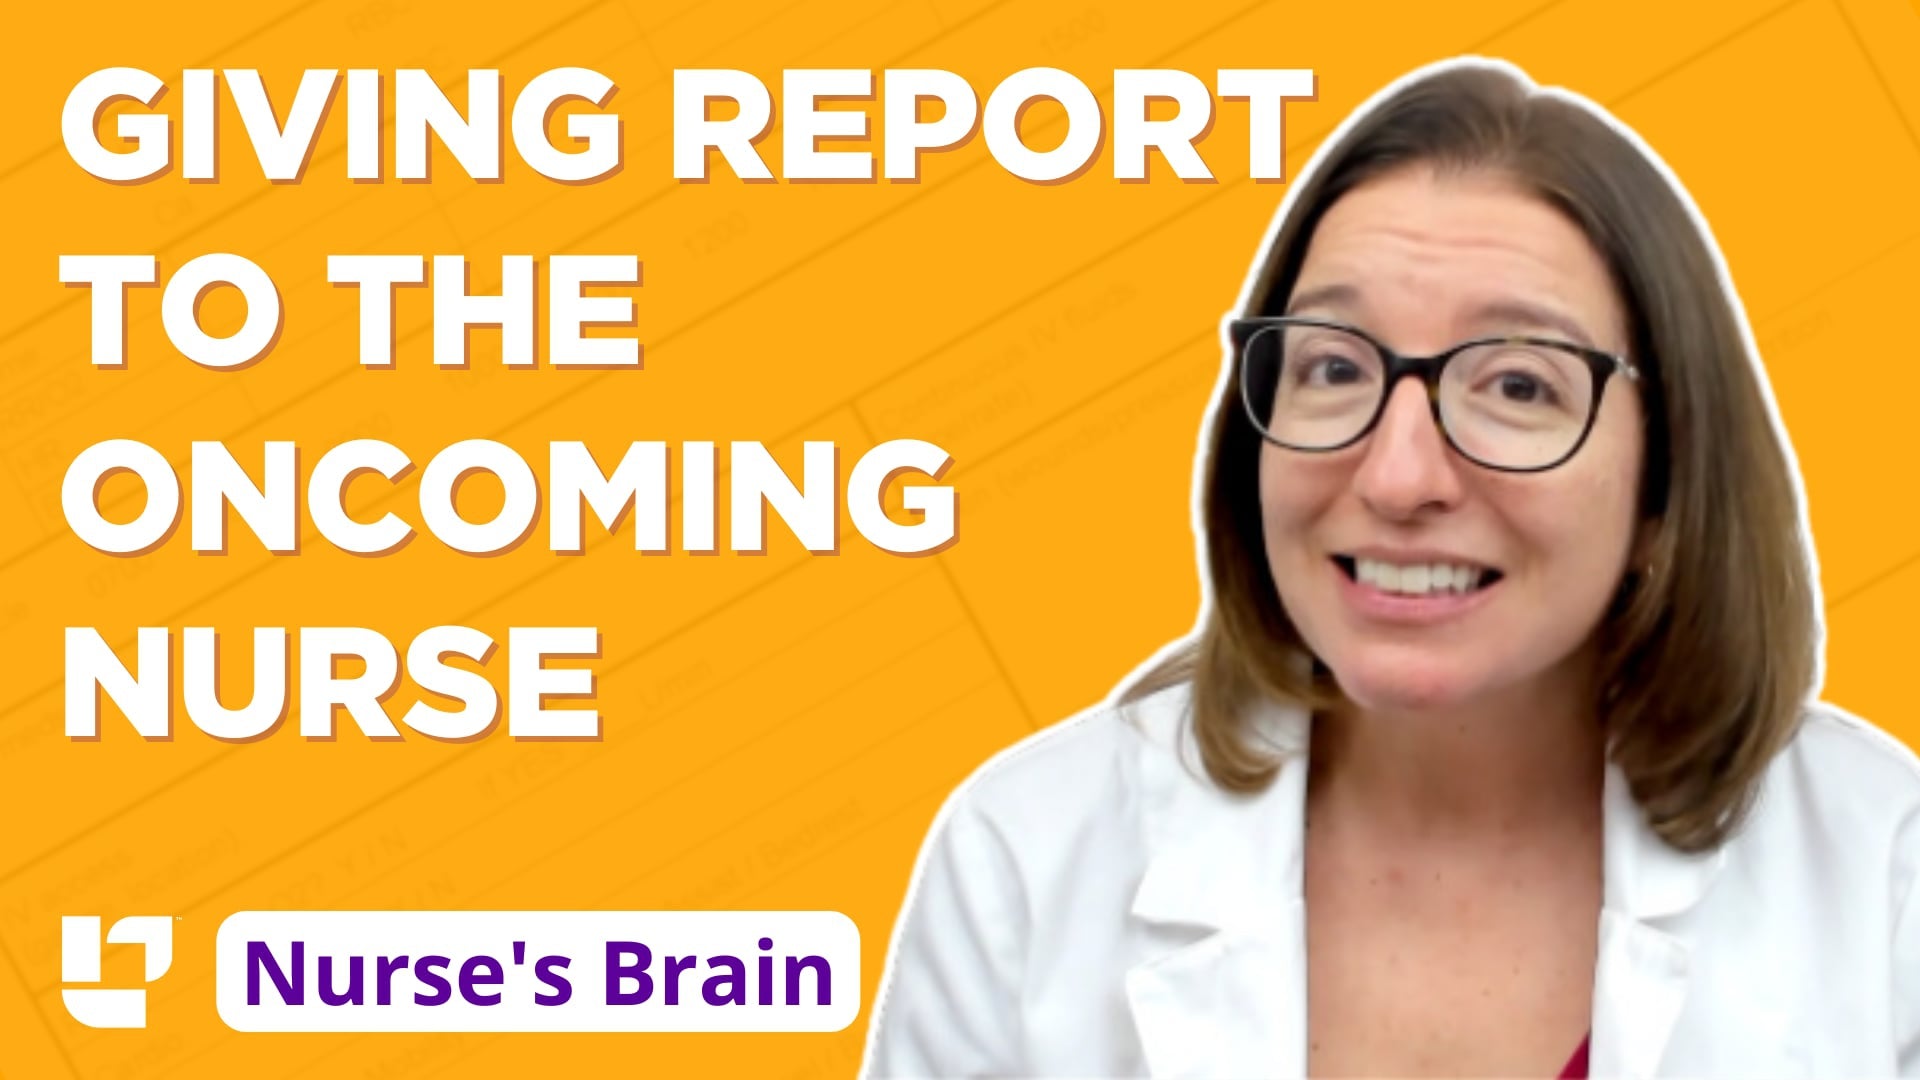 Nurse's Brain, Part 4: Giving report to the oncoming nurse - LevelUpRN